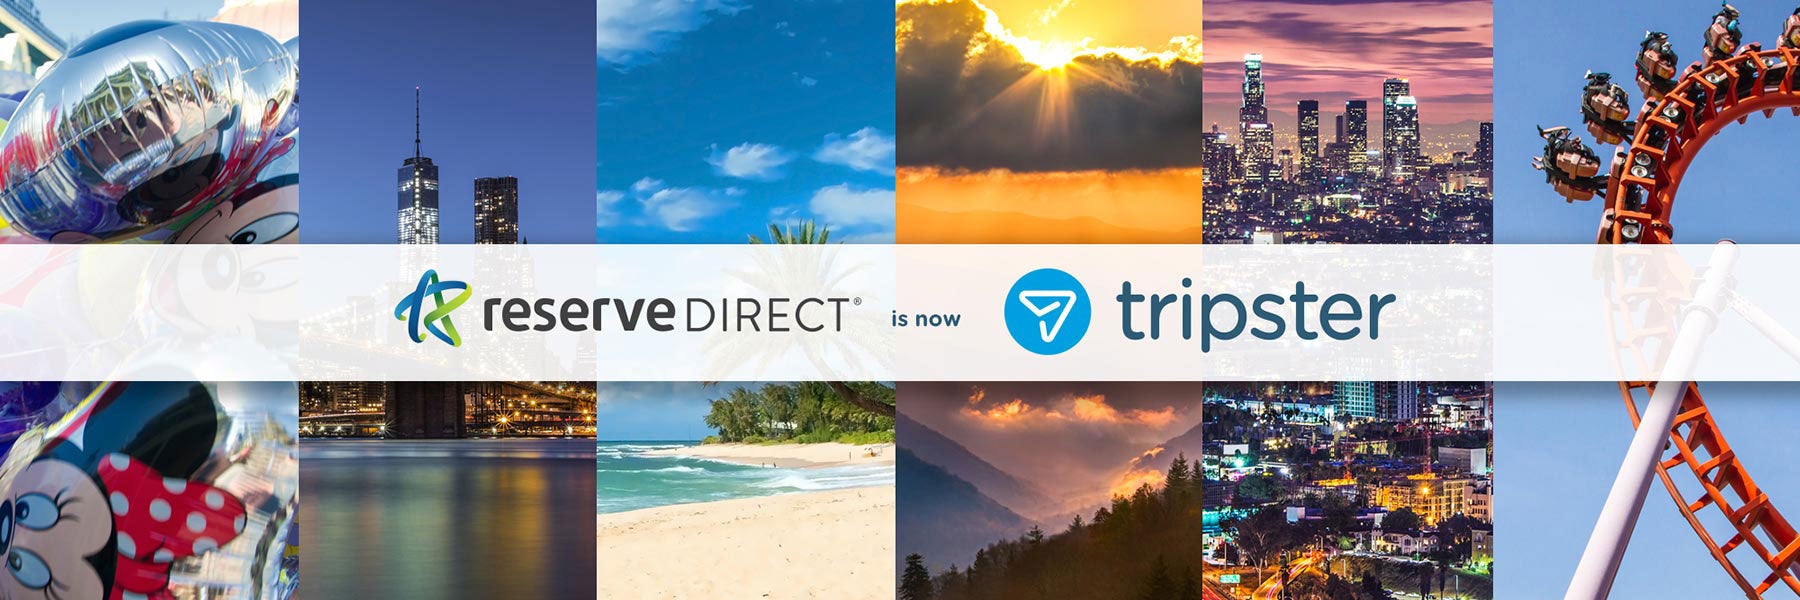 Reserve Direct is now Tripster!